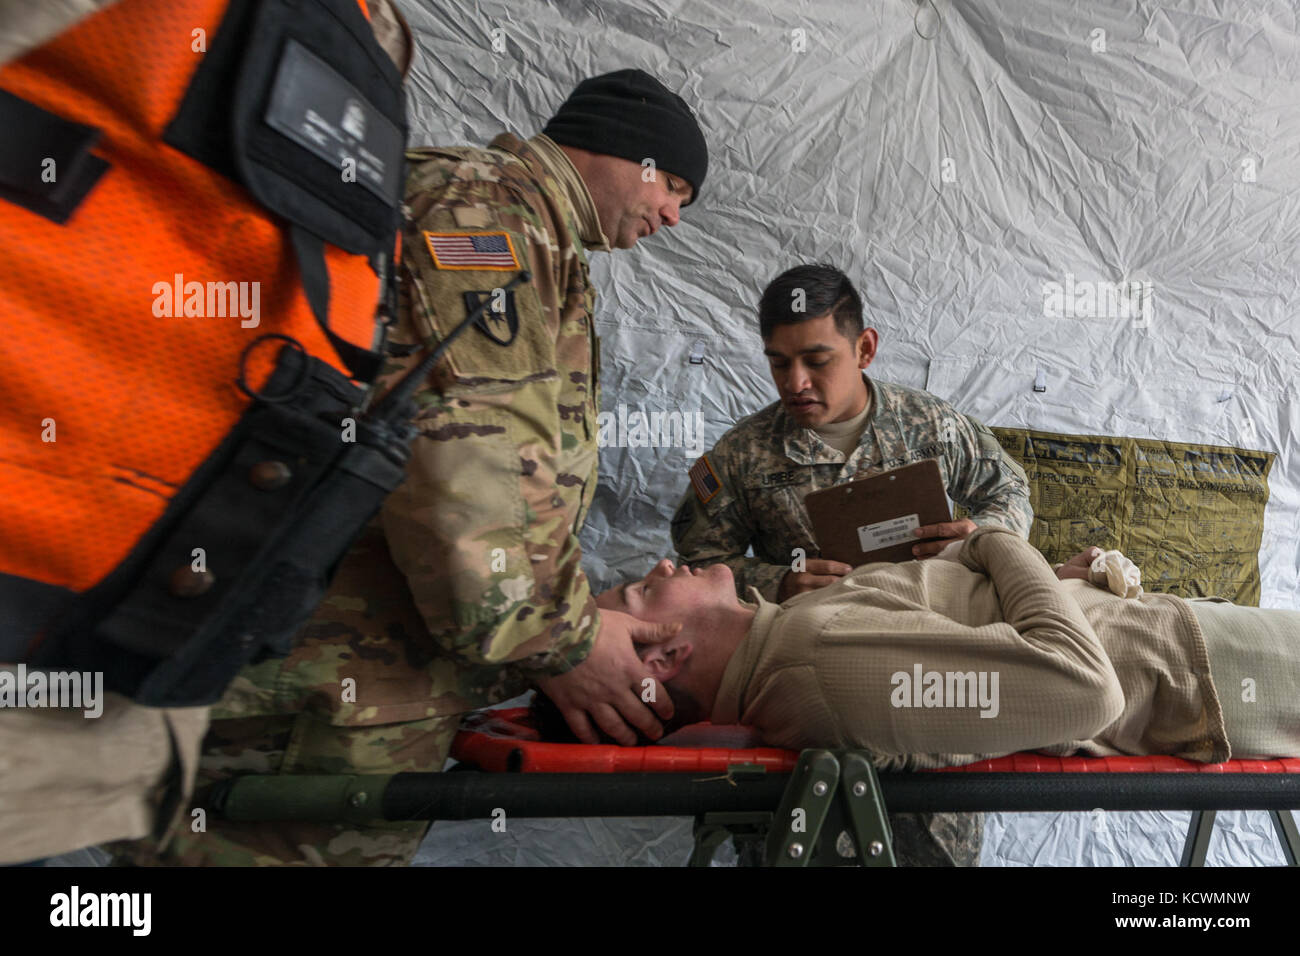 U.S. Army Pfc. Samuel Sides, medic assigned to the 251st Area Support Medical Company, South Carolina Army National Guard, is decontaminated and triaged after becoming non responsive during a joint training exercise at Rosewood Center, Owings Mills, Maryland, March 10, 2017.  The 251st along with the 231st Chemical Company from the Maryland Army National Guard are participating in an U.S. Army North validation exercise where they will be setting up a full medical area and completing triage at the casualty collection point. (U.S. Air National Guard photo by Tech. Sgt. Jorge Intriago) Stock Photo